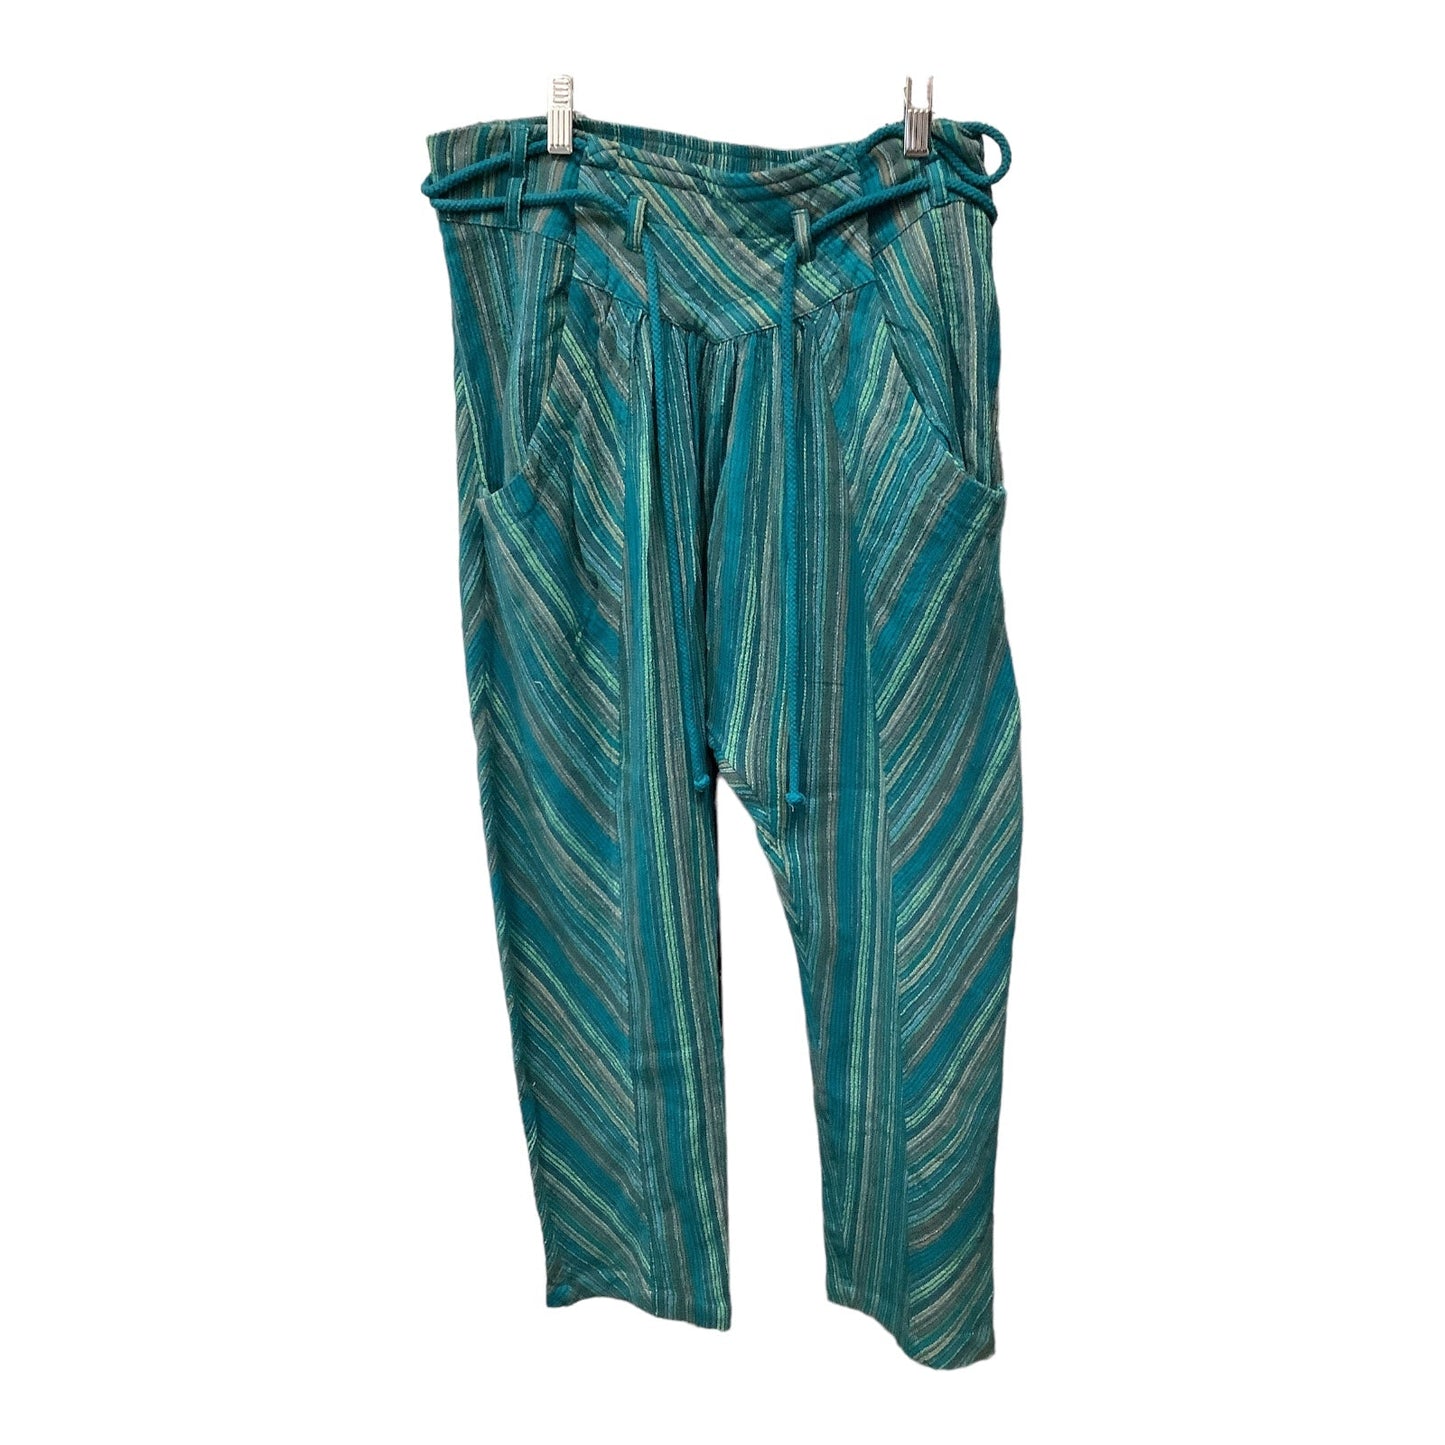 Blue & Green Pants Lounge Free People, Size S